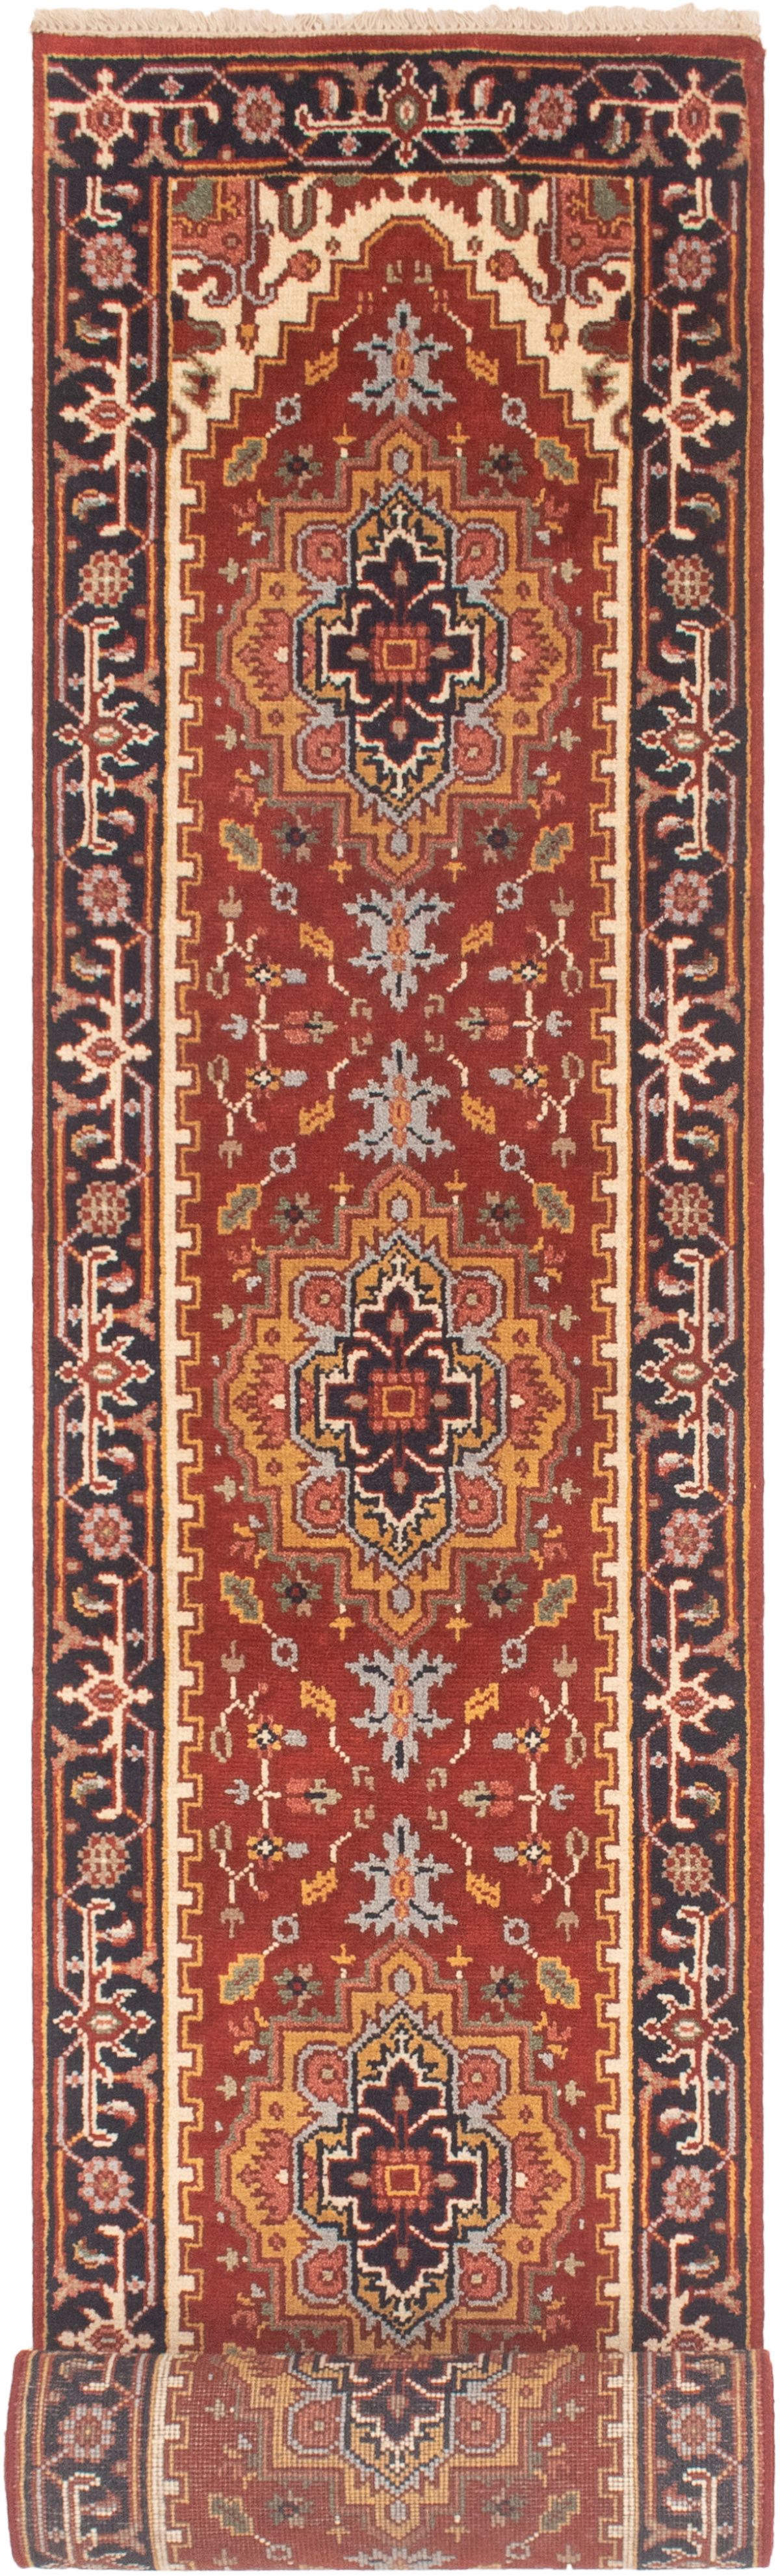 Hand-knotted Serapi Heritage Red Wool Rug 2'5" x 19'6" Size: 2'5" x 19'6"  